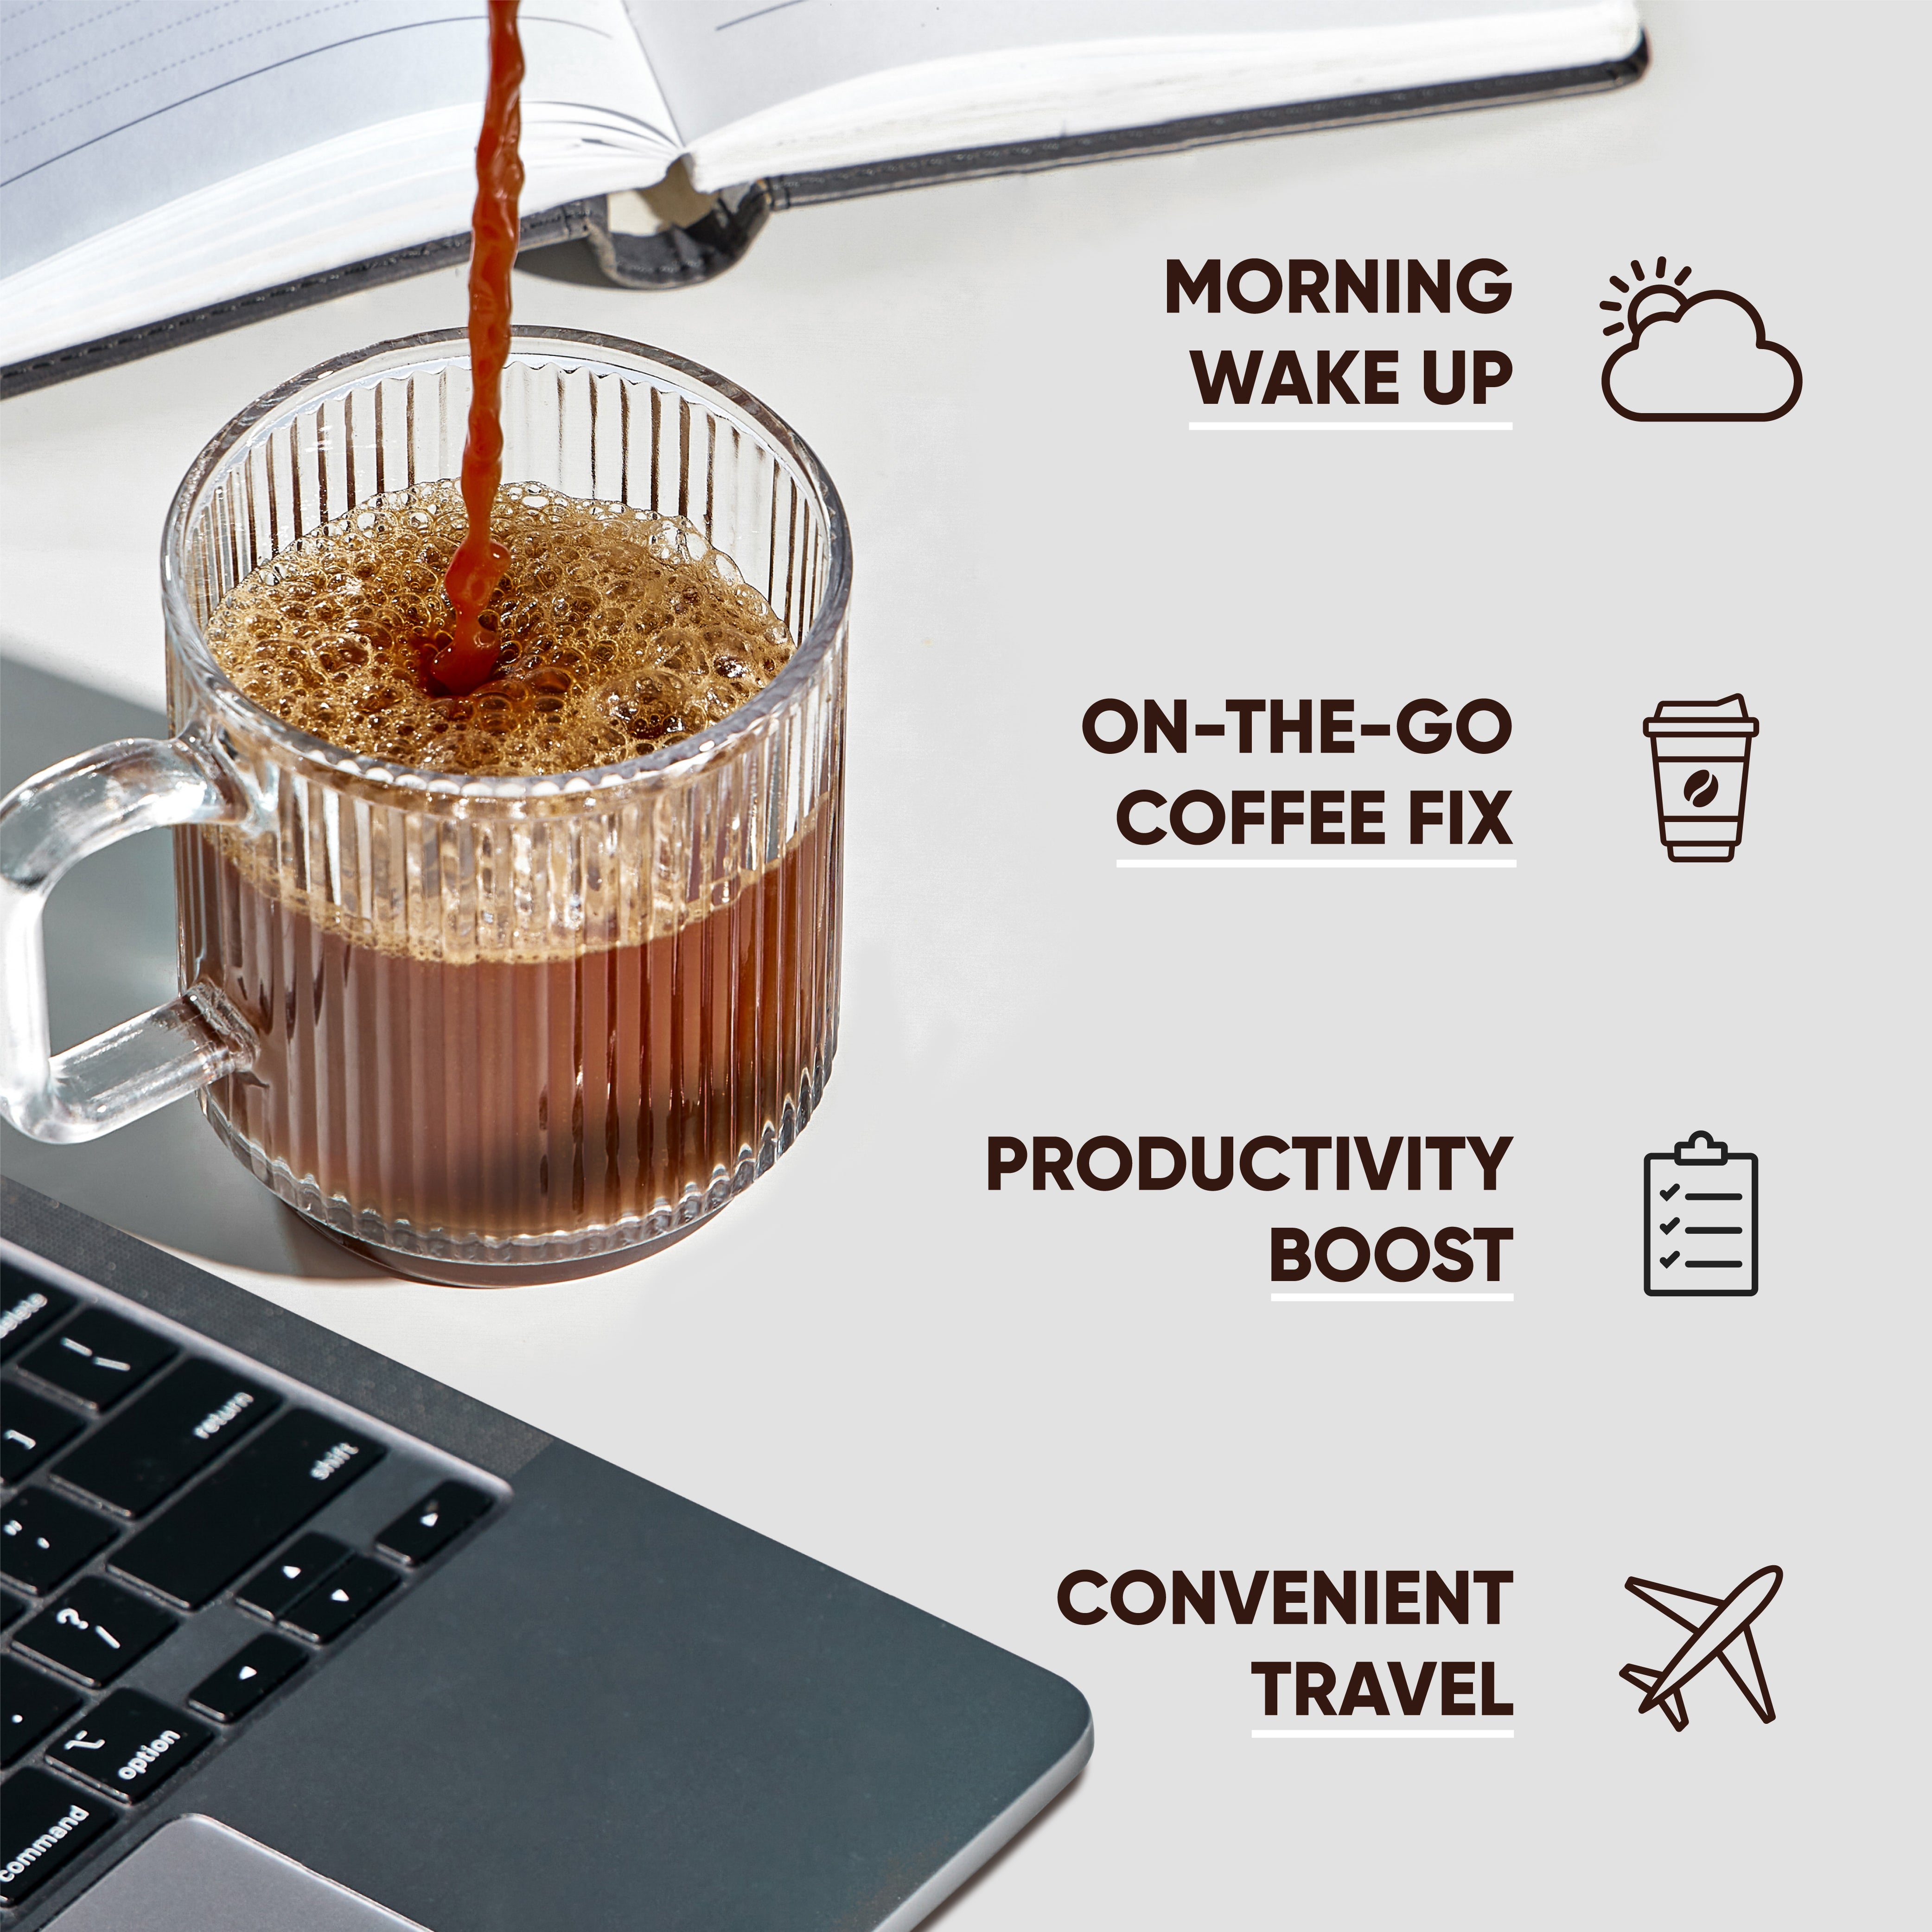 IQJOE Variety Pack 40 sticks, Instant Coffee is great for: walking up in the morning, on-the-go coffee, productivity boost, convenient travel.